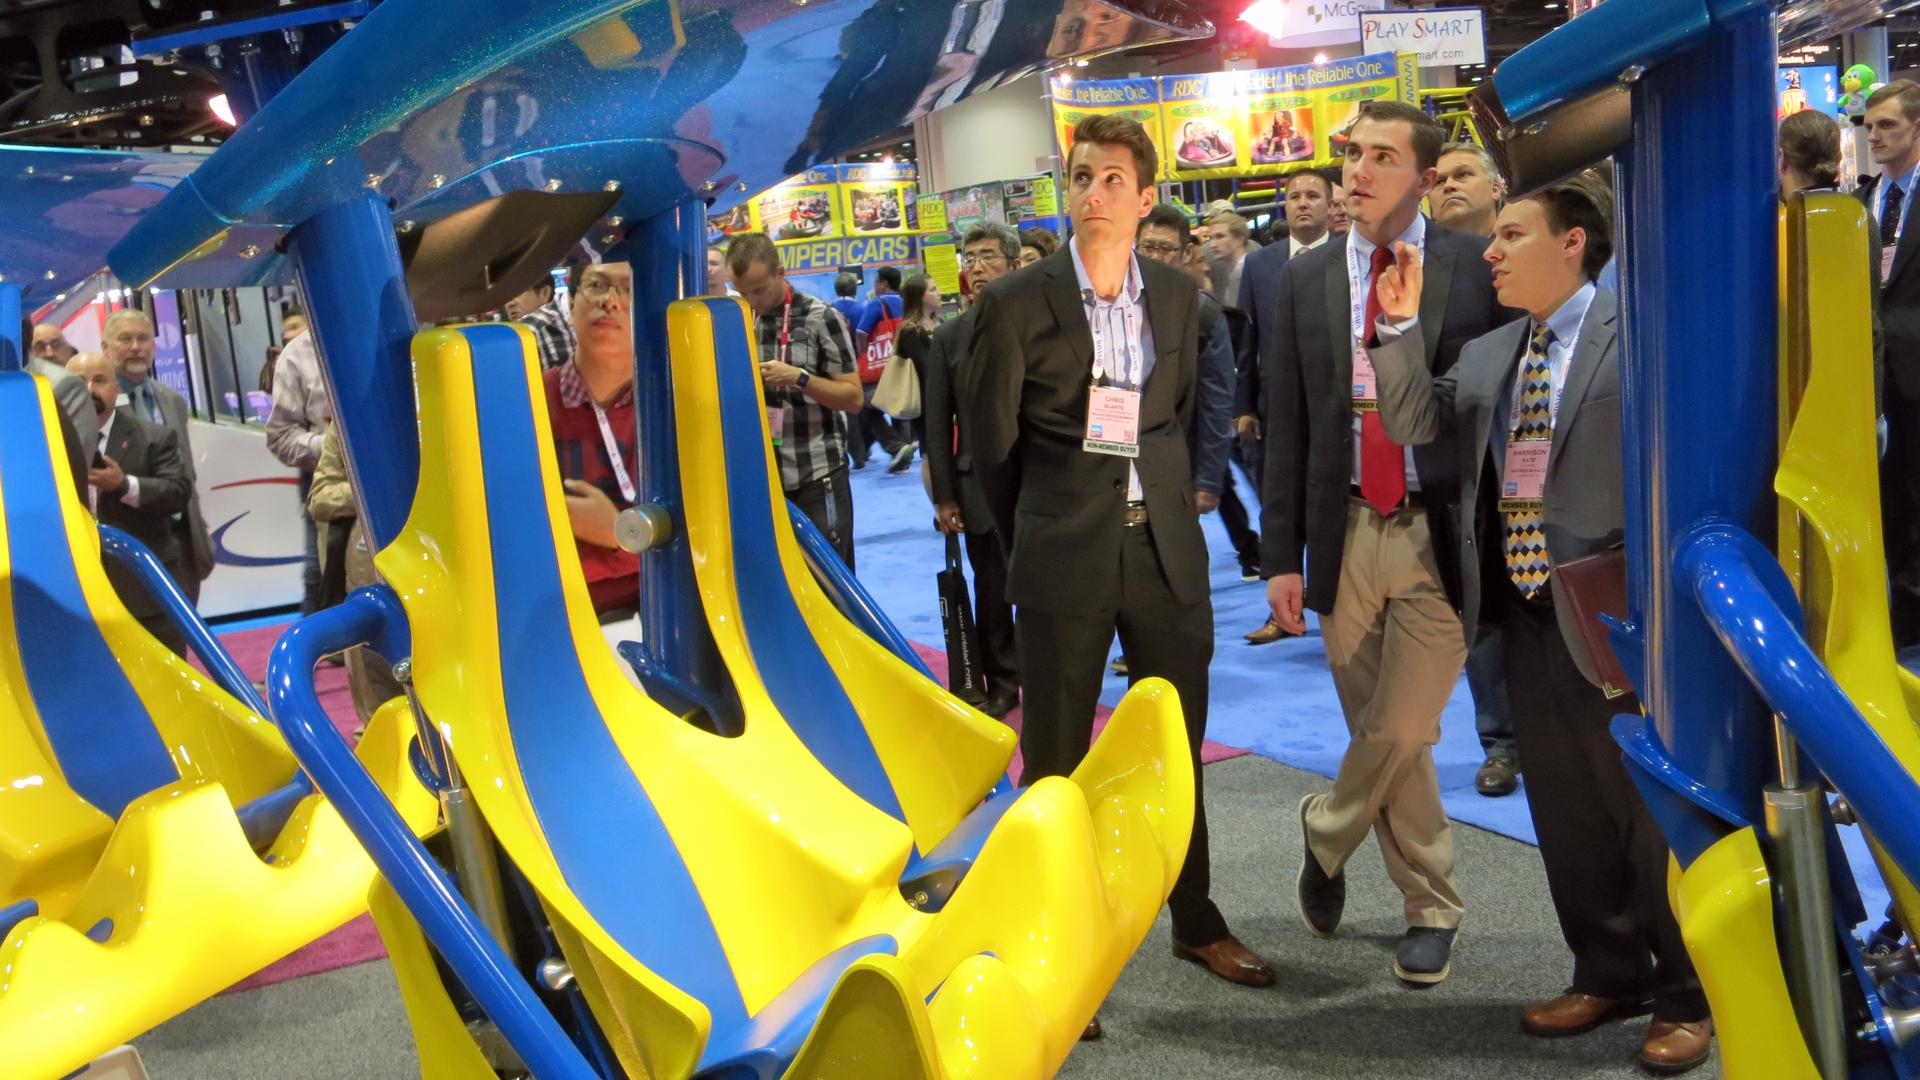 Park operators inspect the latest roller coaster designs at the IAAPA Expo in Orlando.